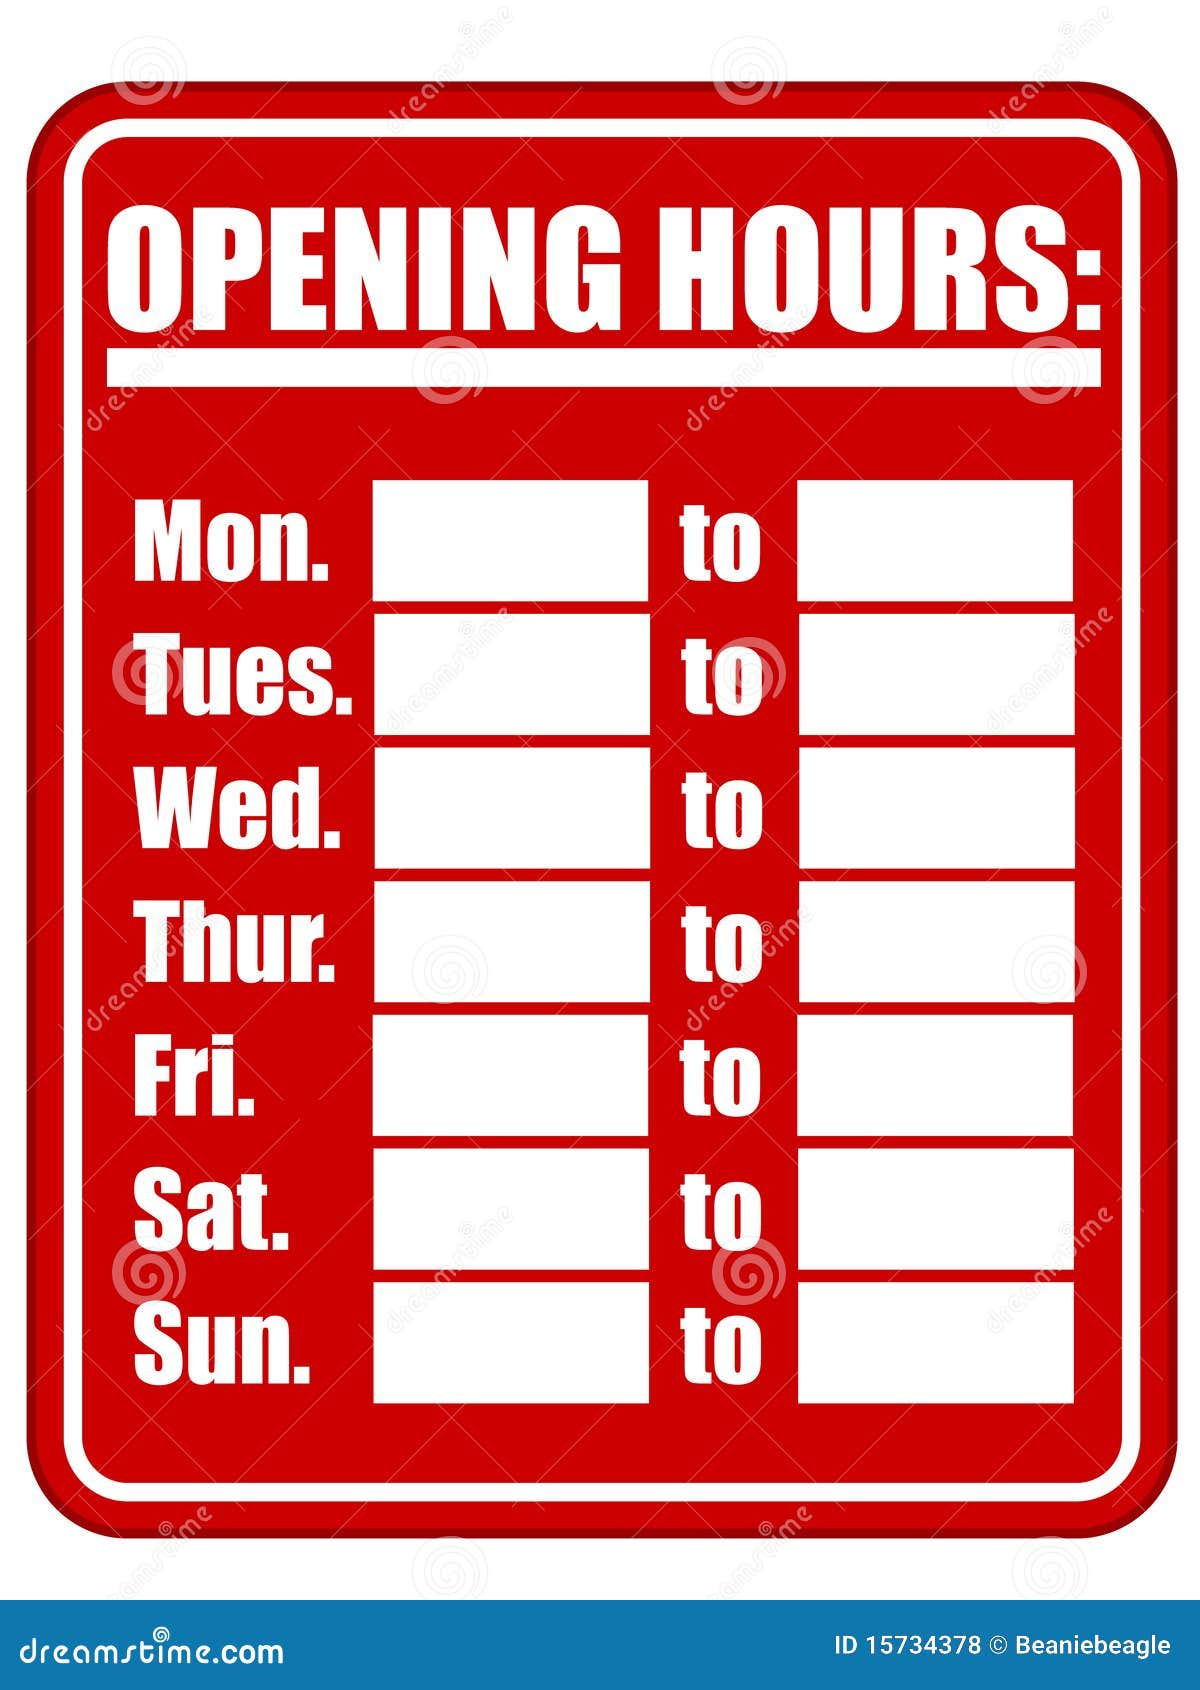 business hours clipart - photo #18